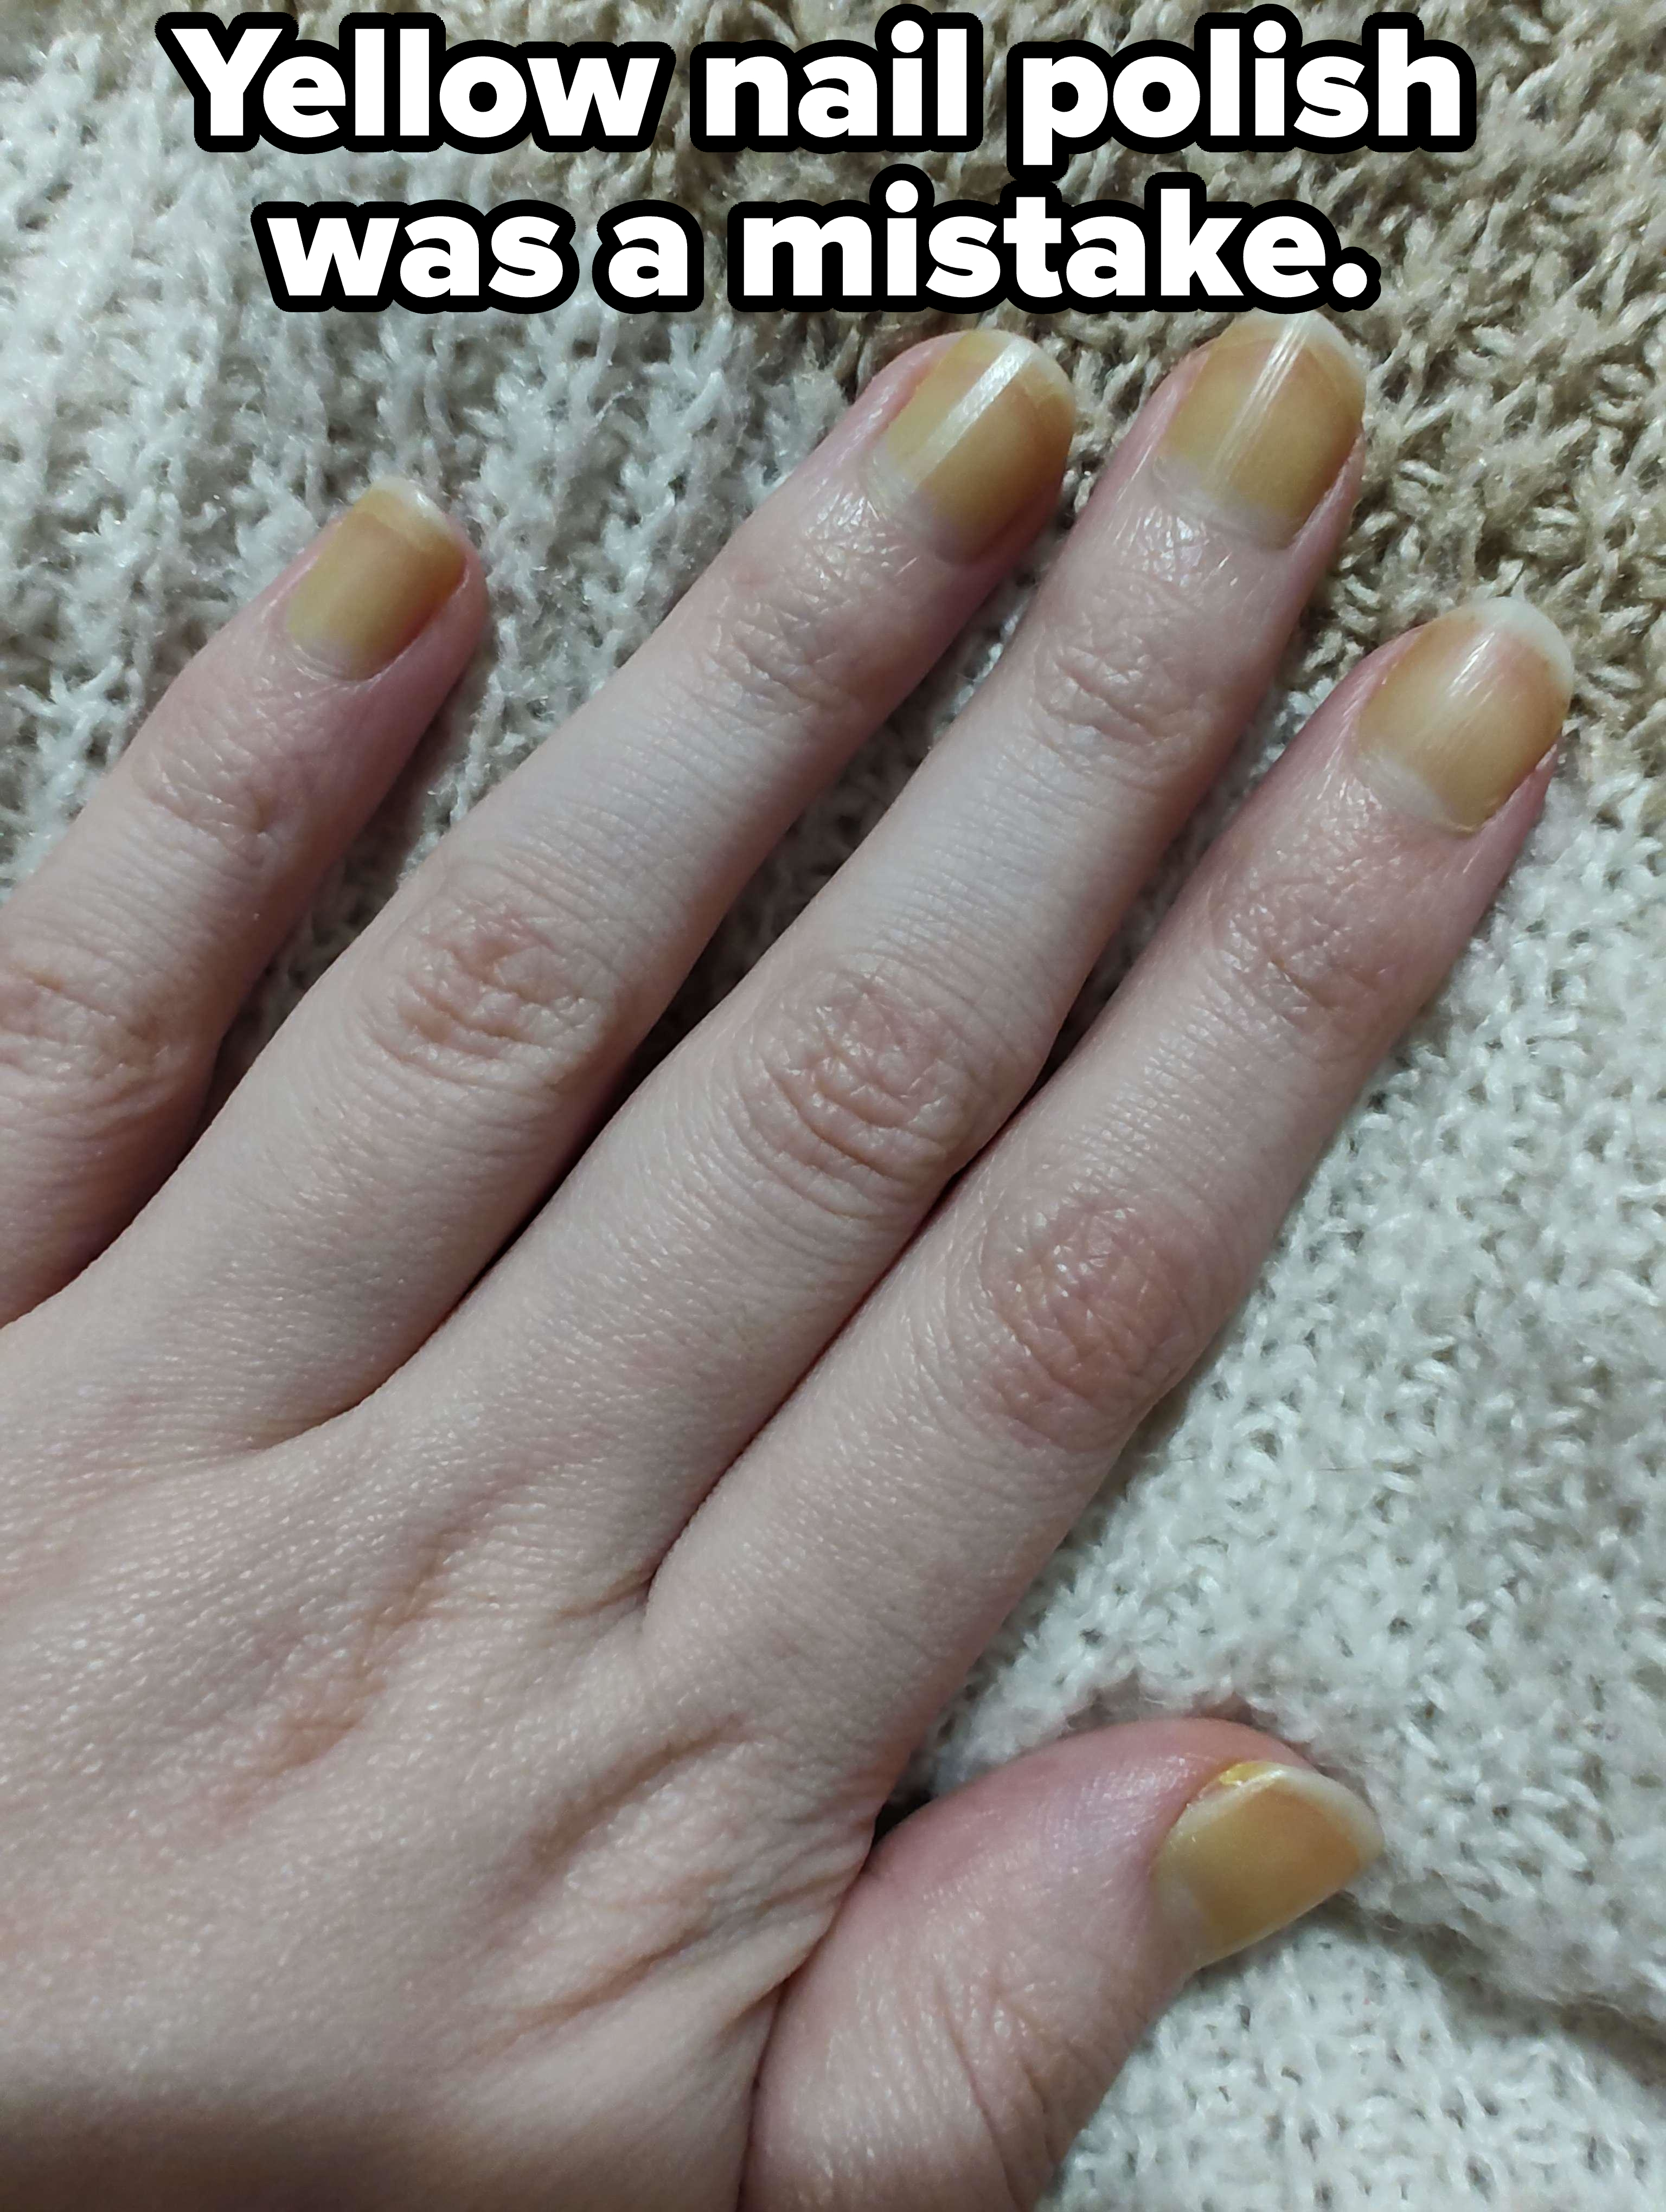 A close-up of a person&#x27;s hand with yellow-tinted nails, placed on a knitted fabric background. The image shows irregular nail coloration